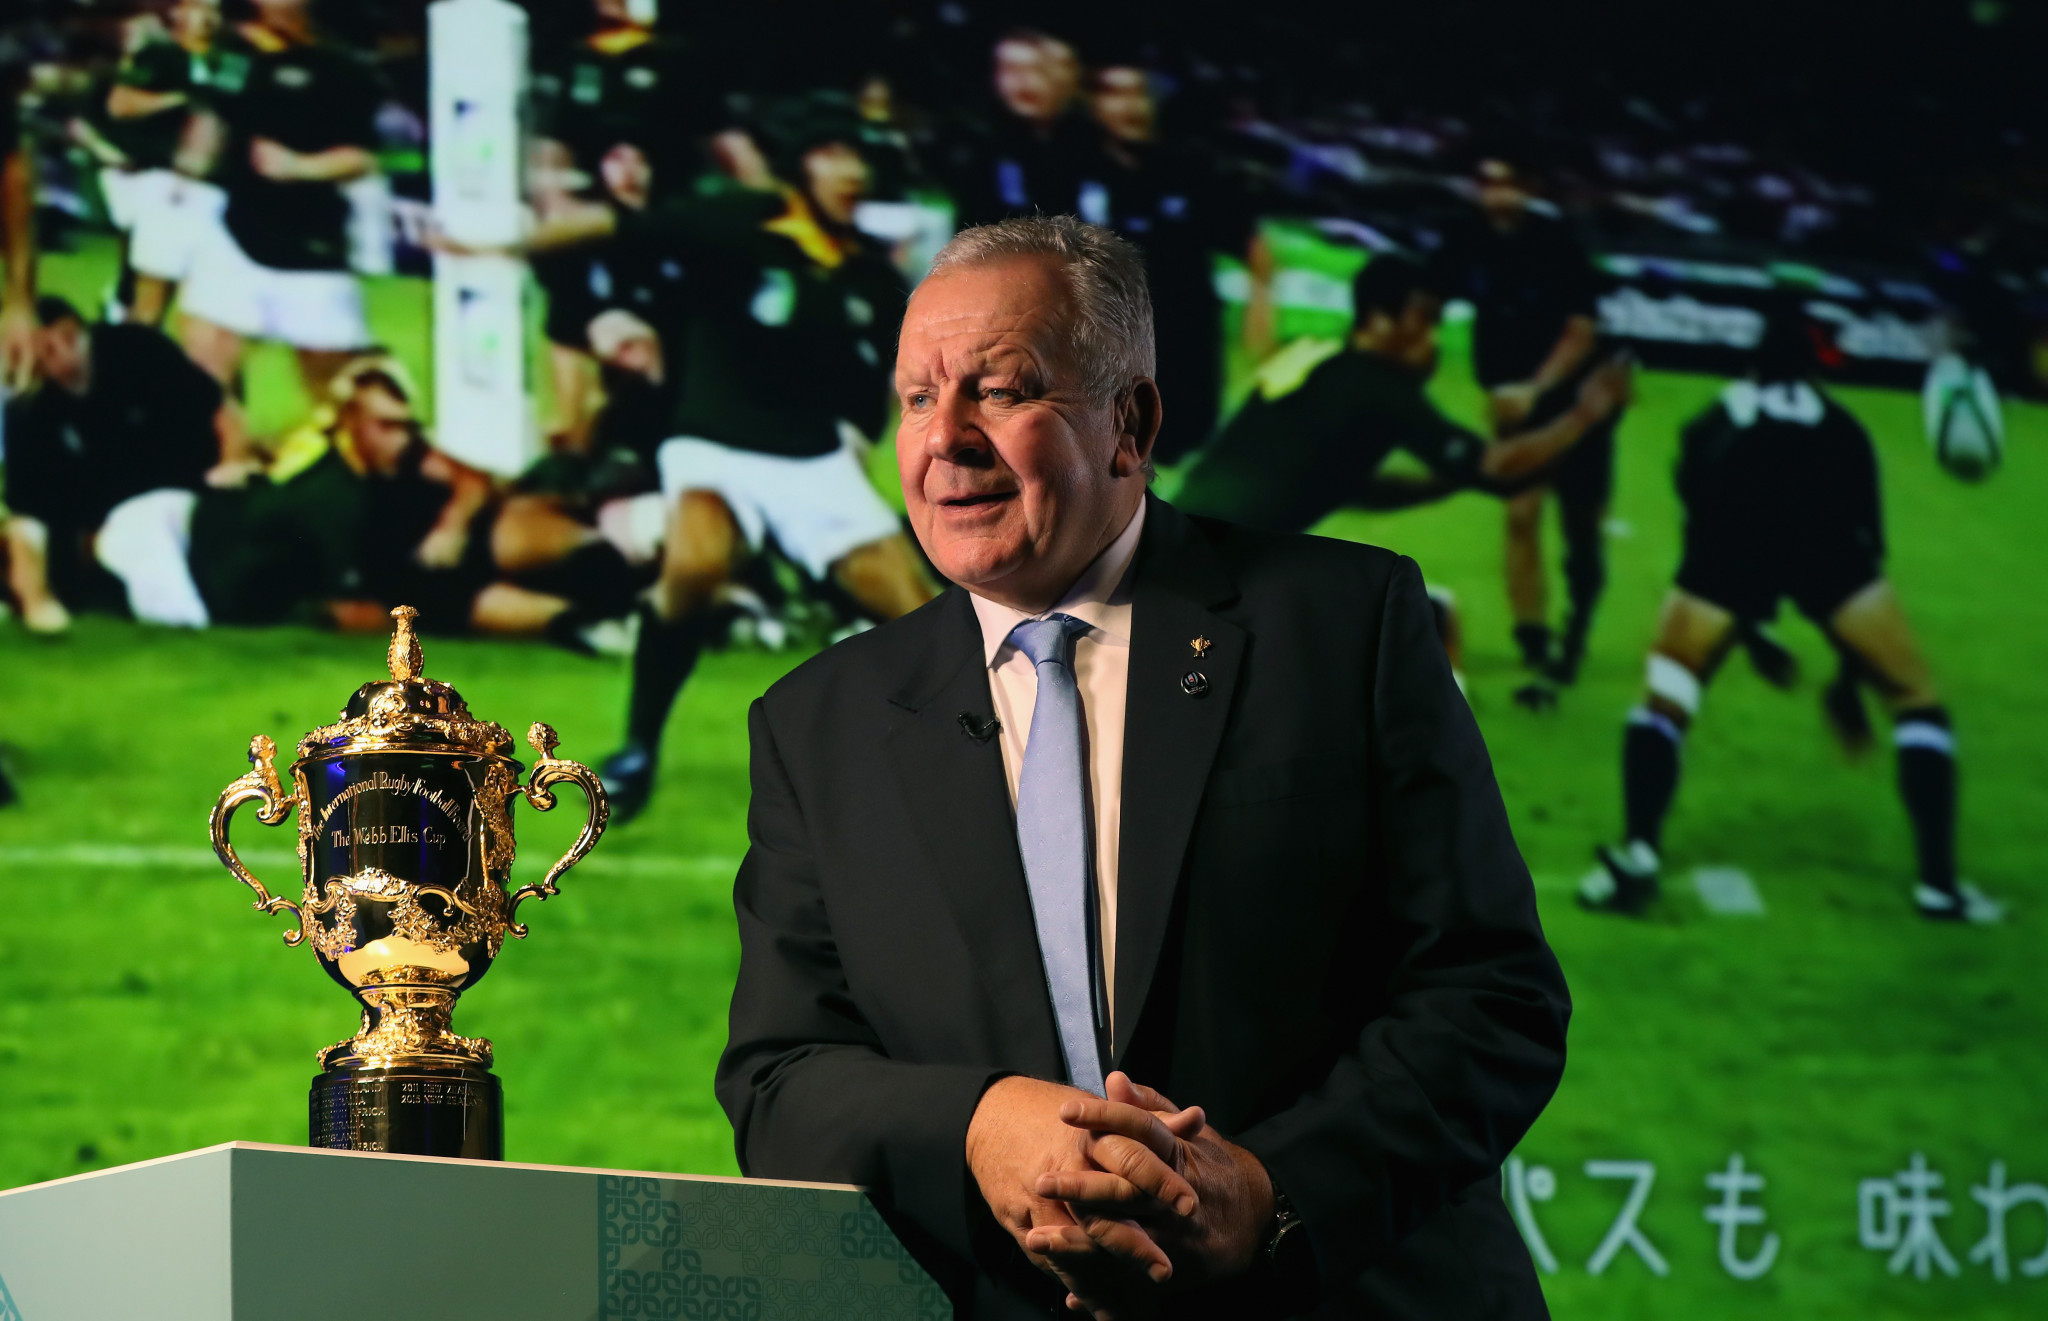 World Rugby chairman Bill Beaumont said the level of interest reflects the excitement for next year's World Cup in Japan ©Getty Images